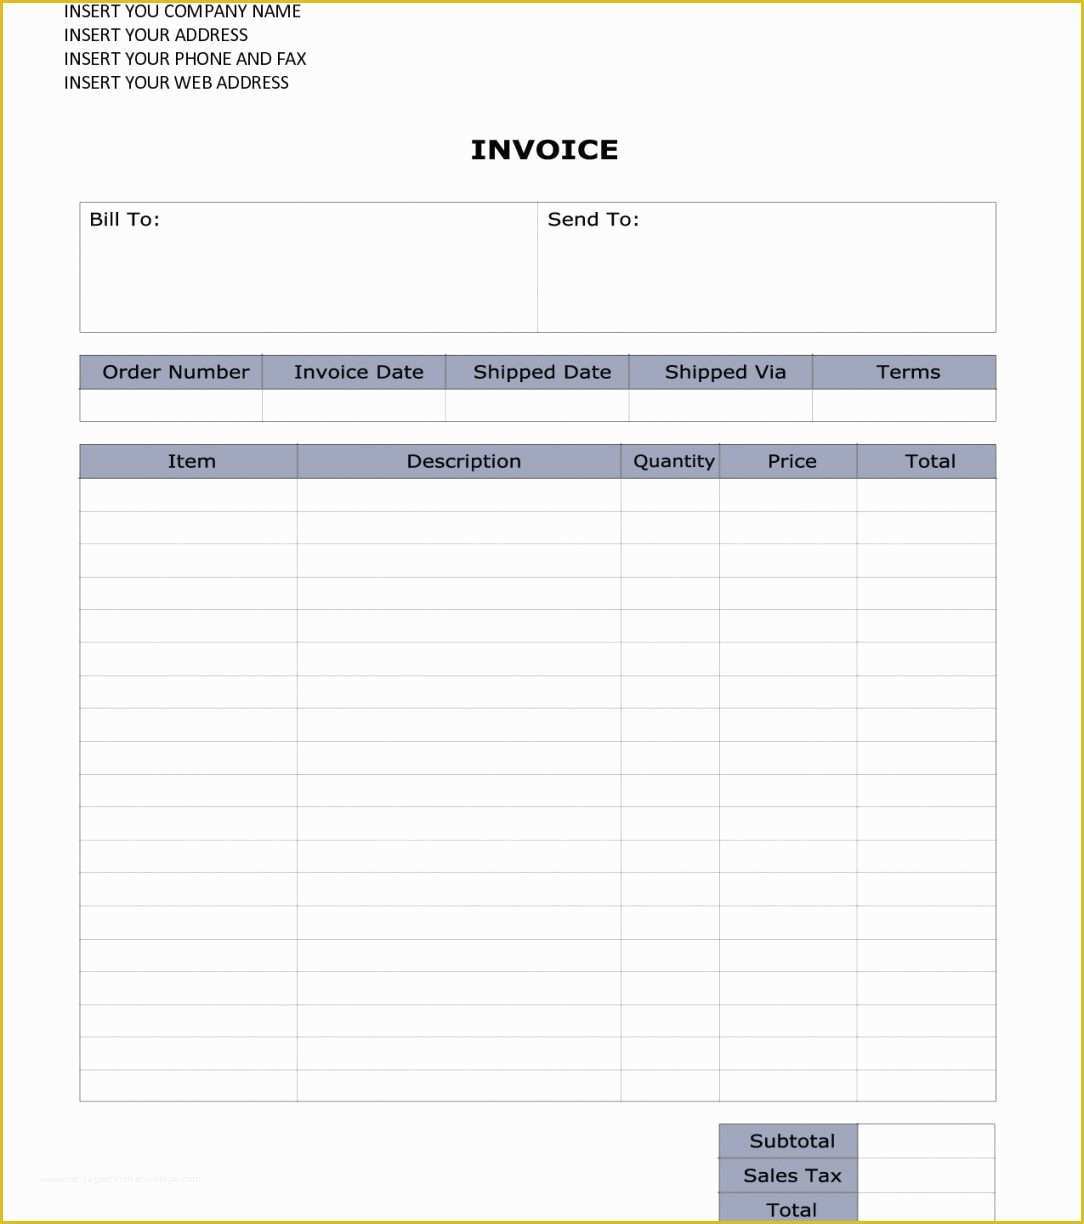 Microsoft Invoice Template Free Download Of Microsoft Works Templates Free Resume Download Spreadsheet